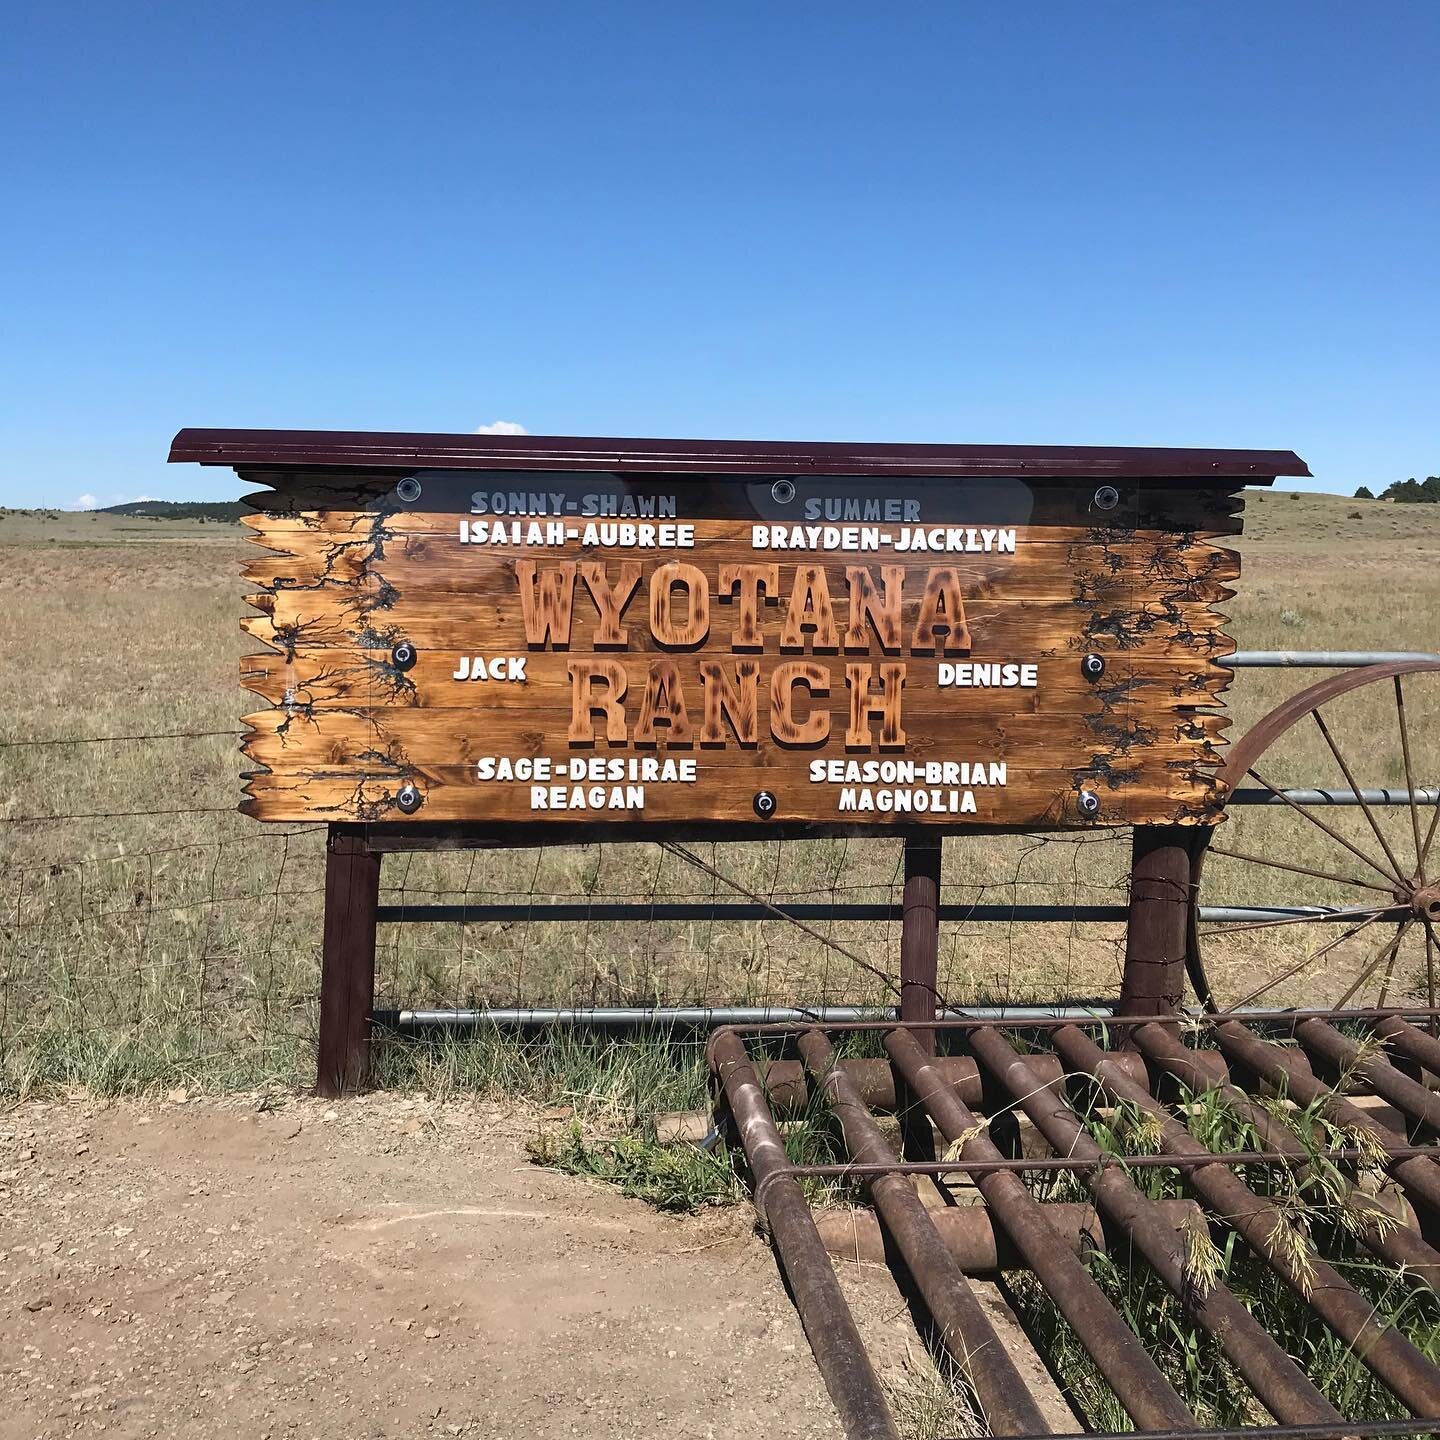 This is where I was born and raised. On the border of Montana, Wyoming and 19 miles from South Dakota. Our ranch sold and it will be a tough pill to swallow when they sign the closing papers soon.

And no, that&rsquo;s not a scene from Schitt&rsquo;s